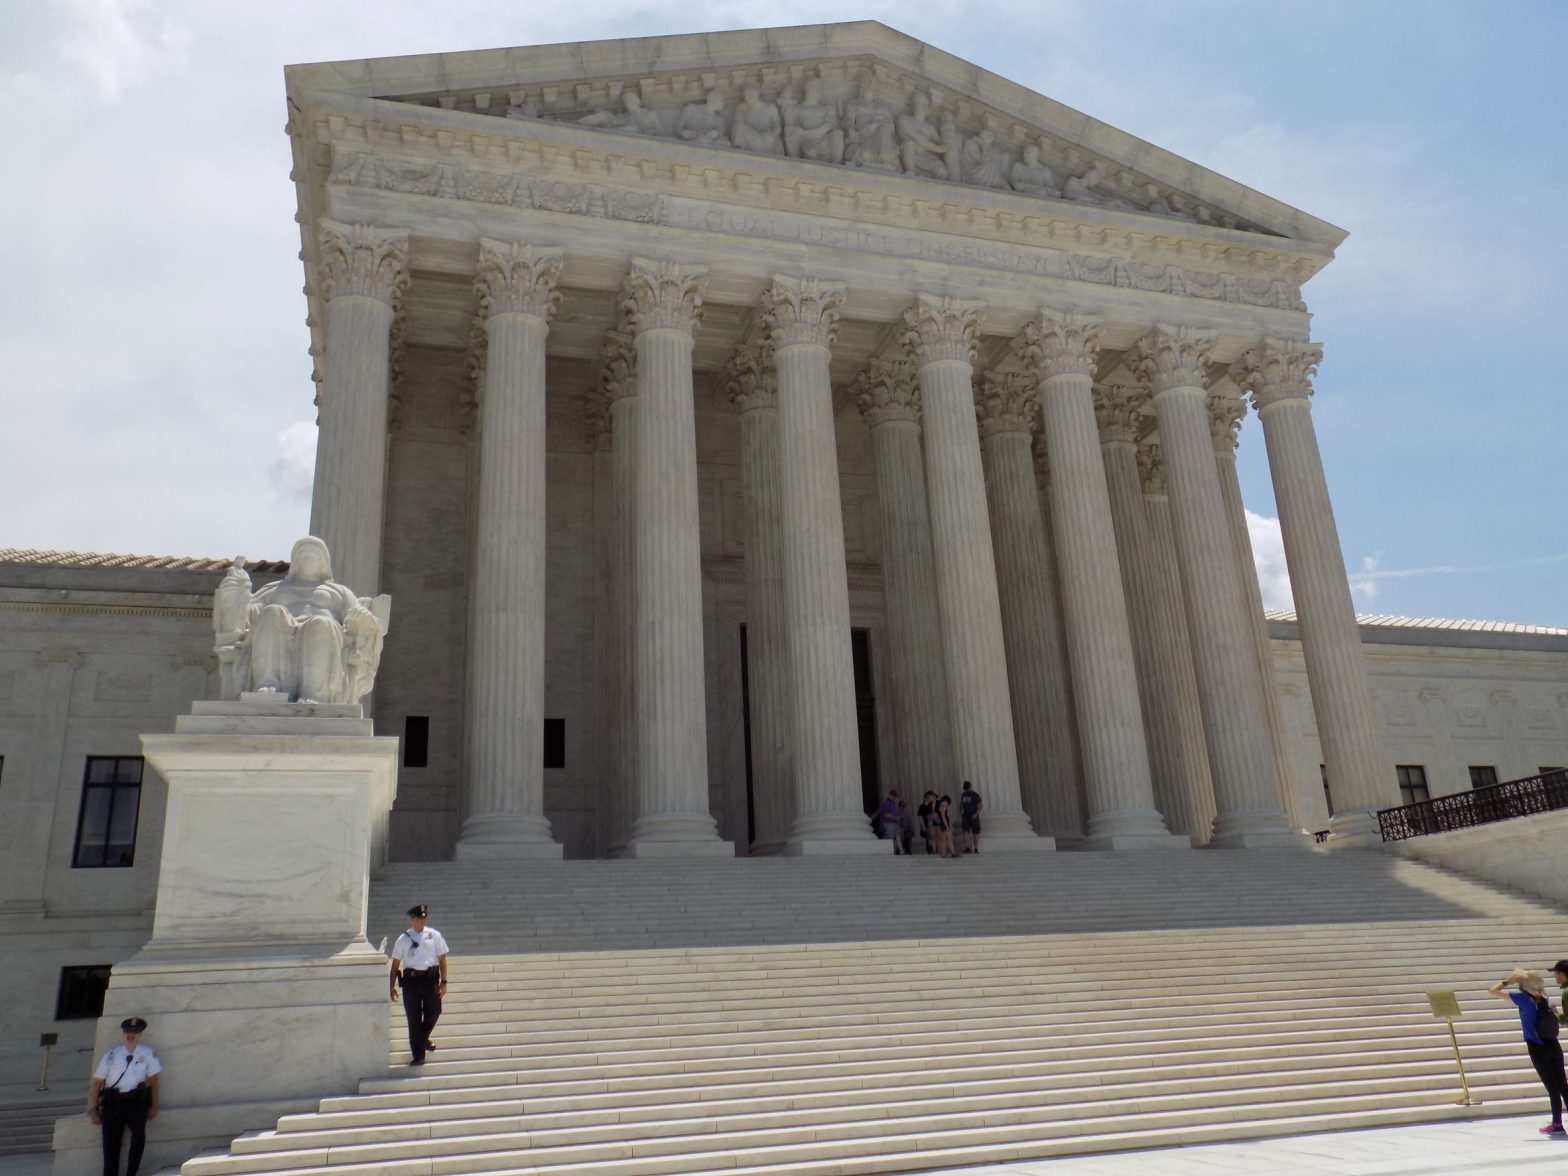 Internet Companies Tell Supreme Court They Should Not Be Liable for Terrorism